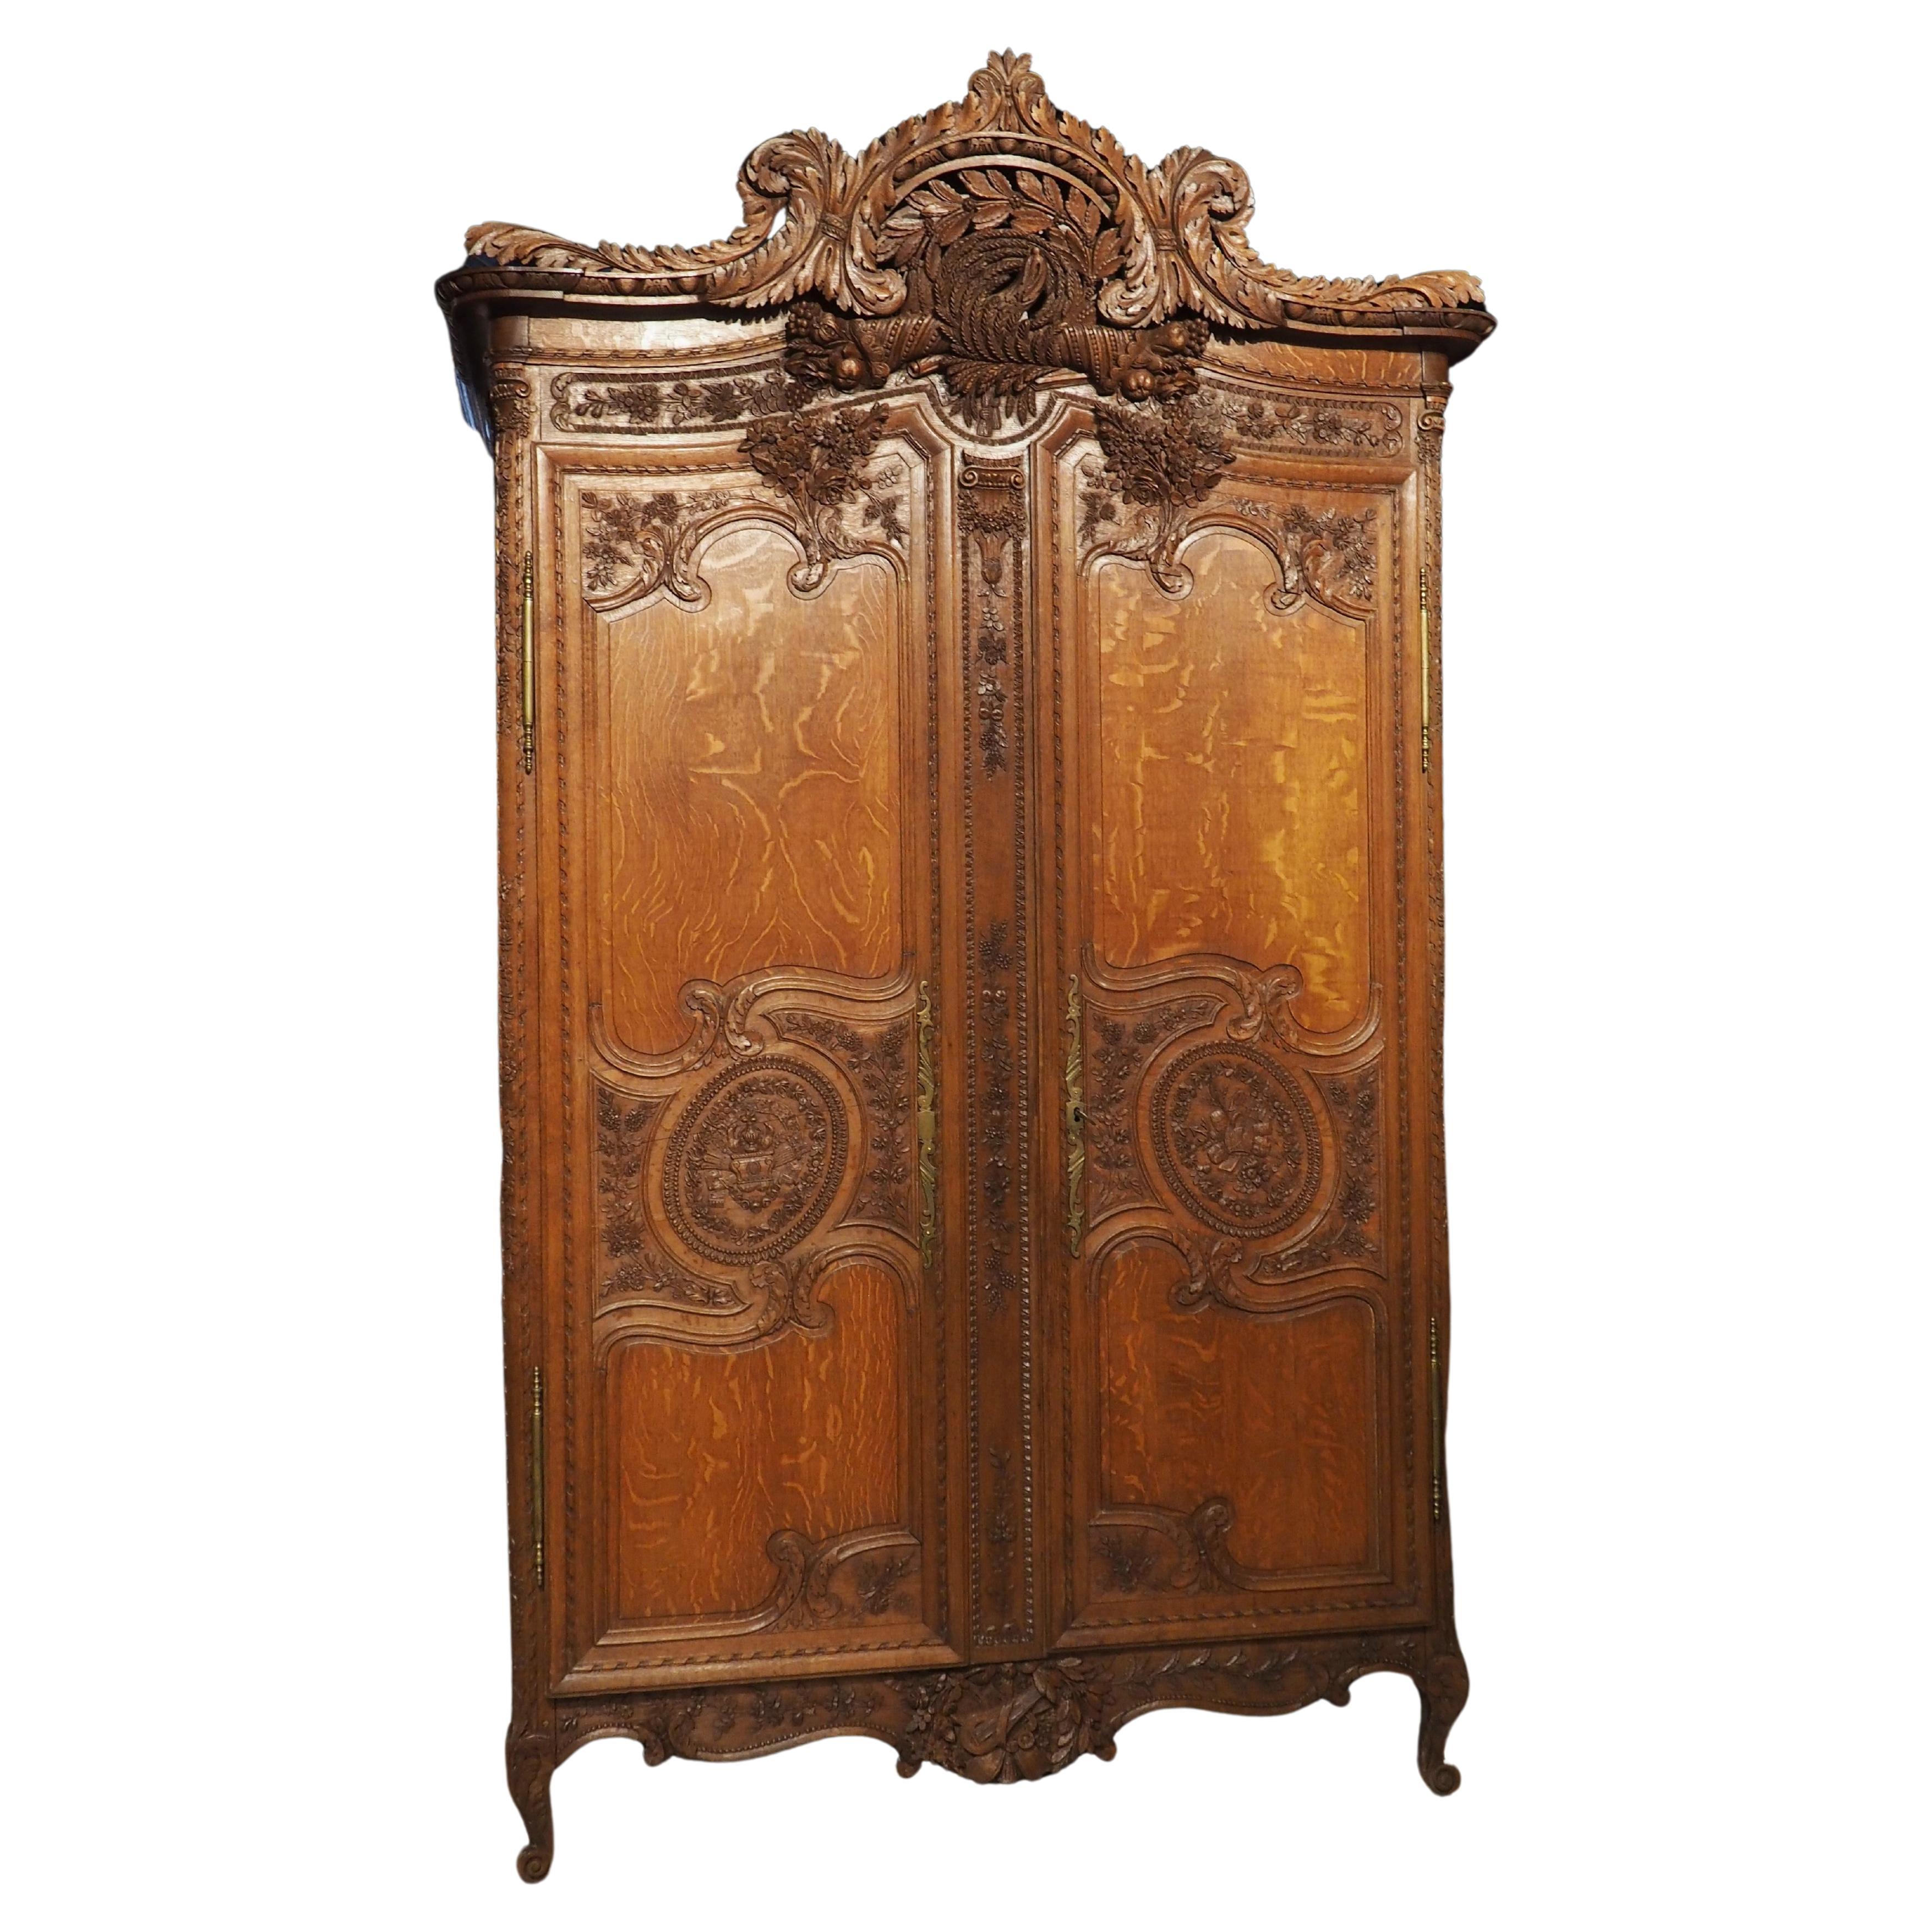 Museum Quality 19th Century Wedding Armoire in Carved Oak from Normandy France